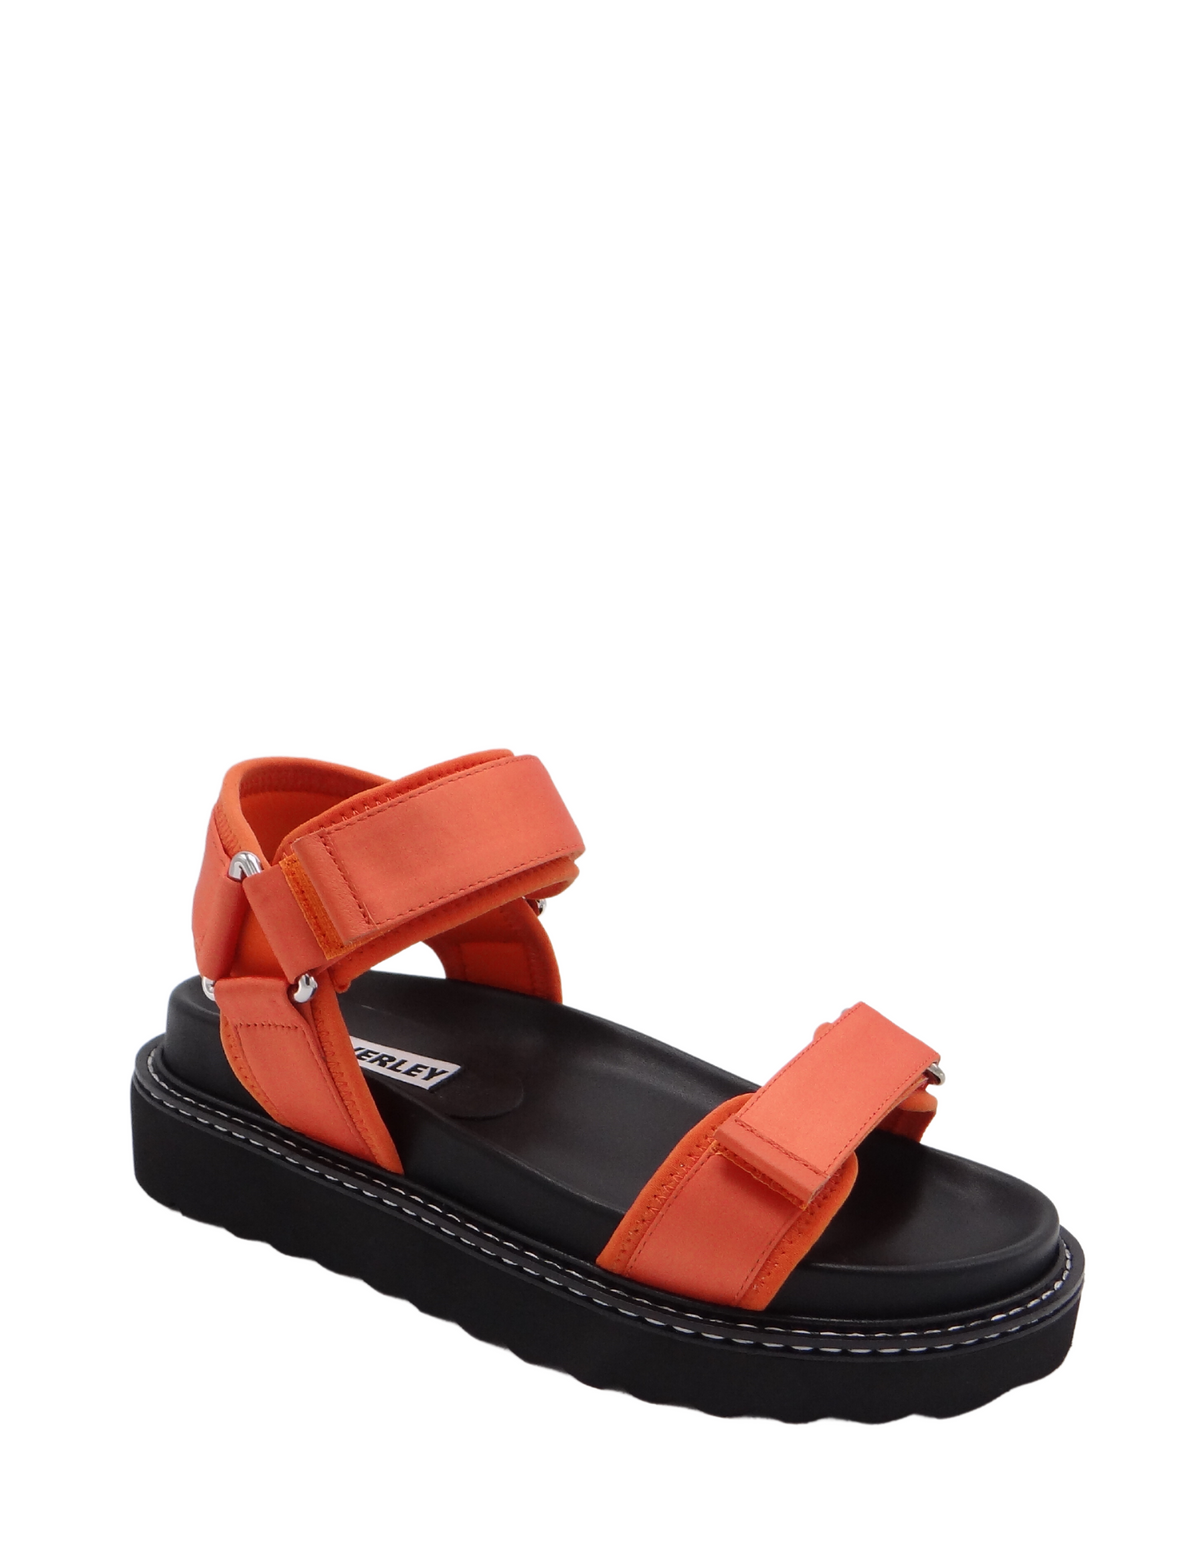 Parallel Culture Shoes and Fashion Online SANDALS CAVERLY RONI SANDAL